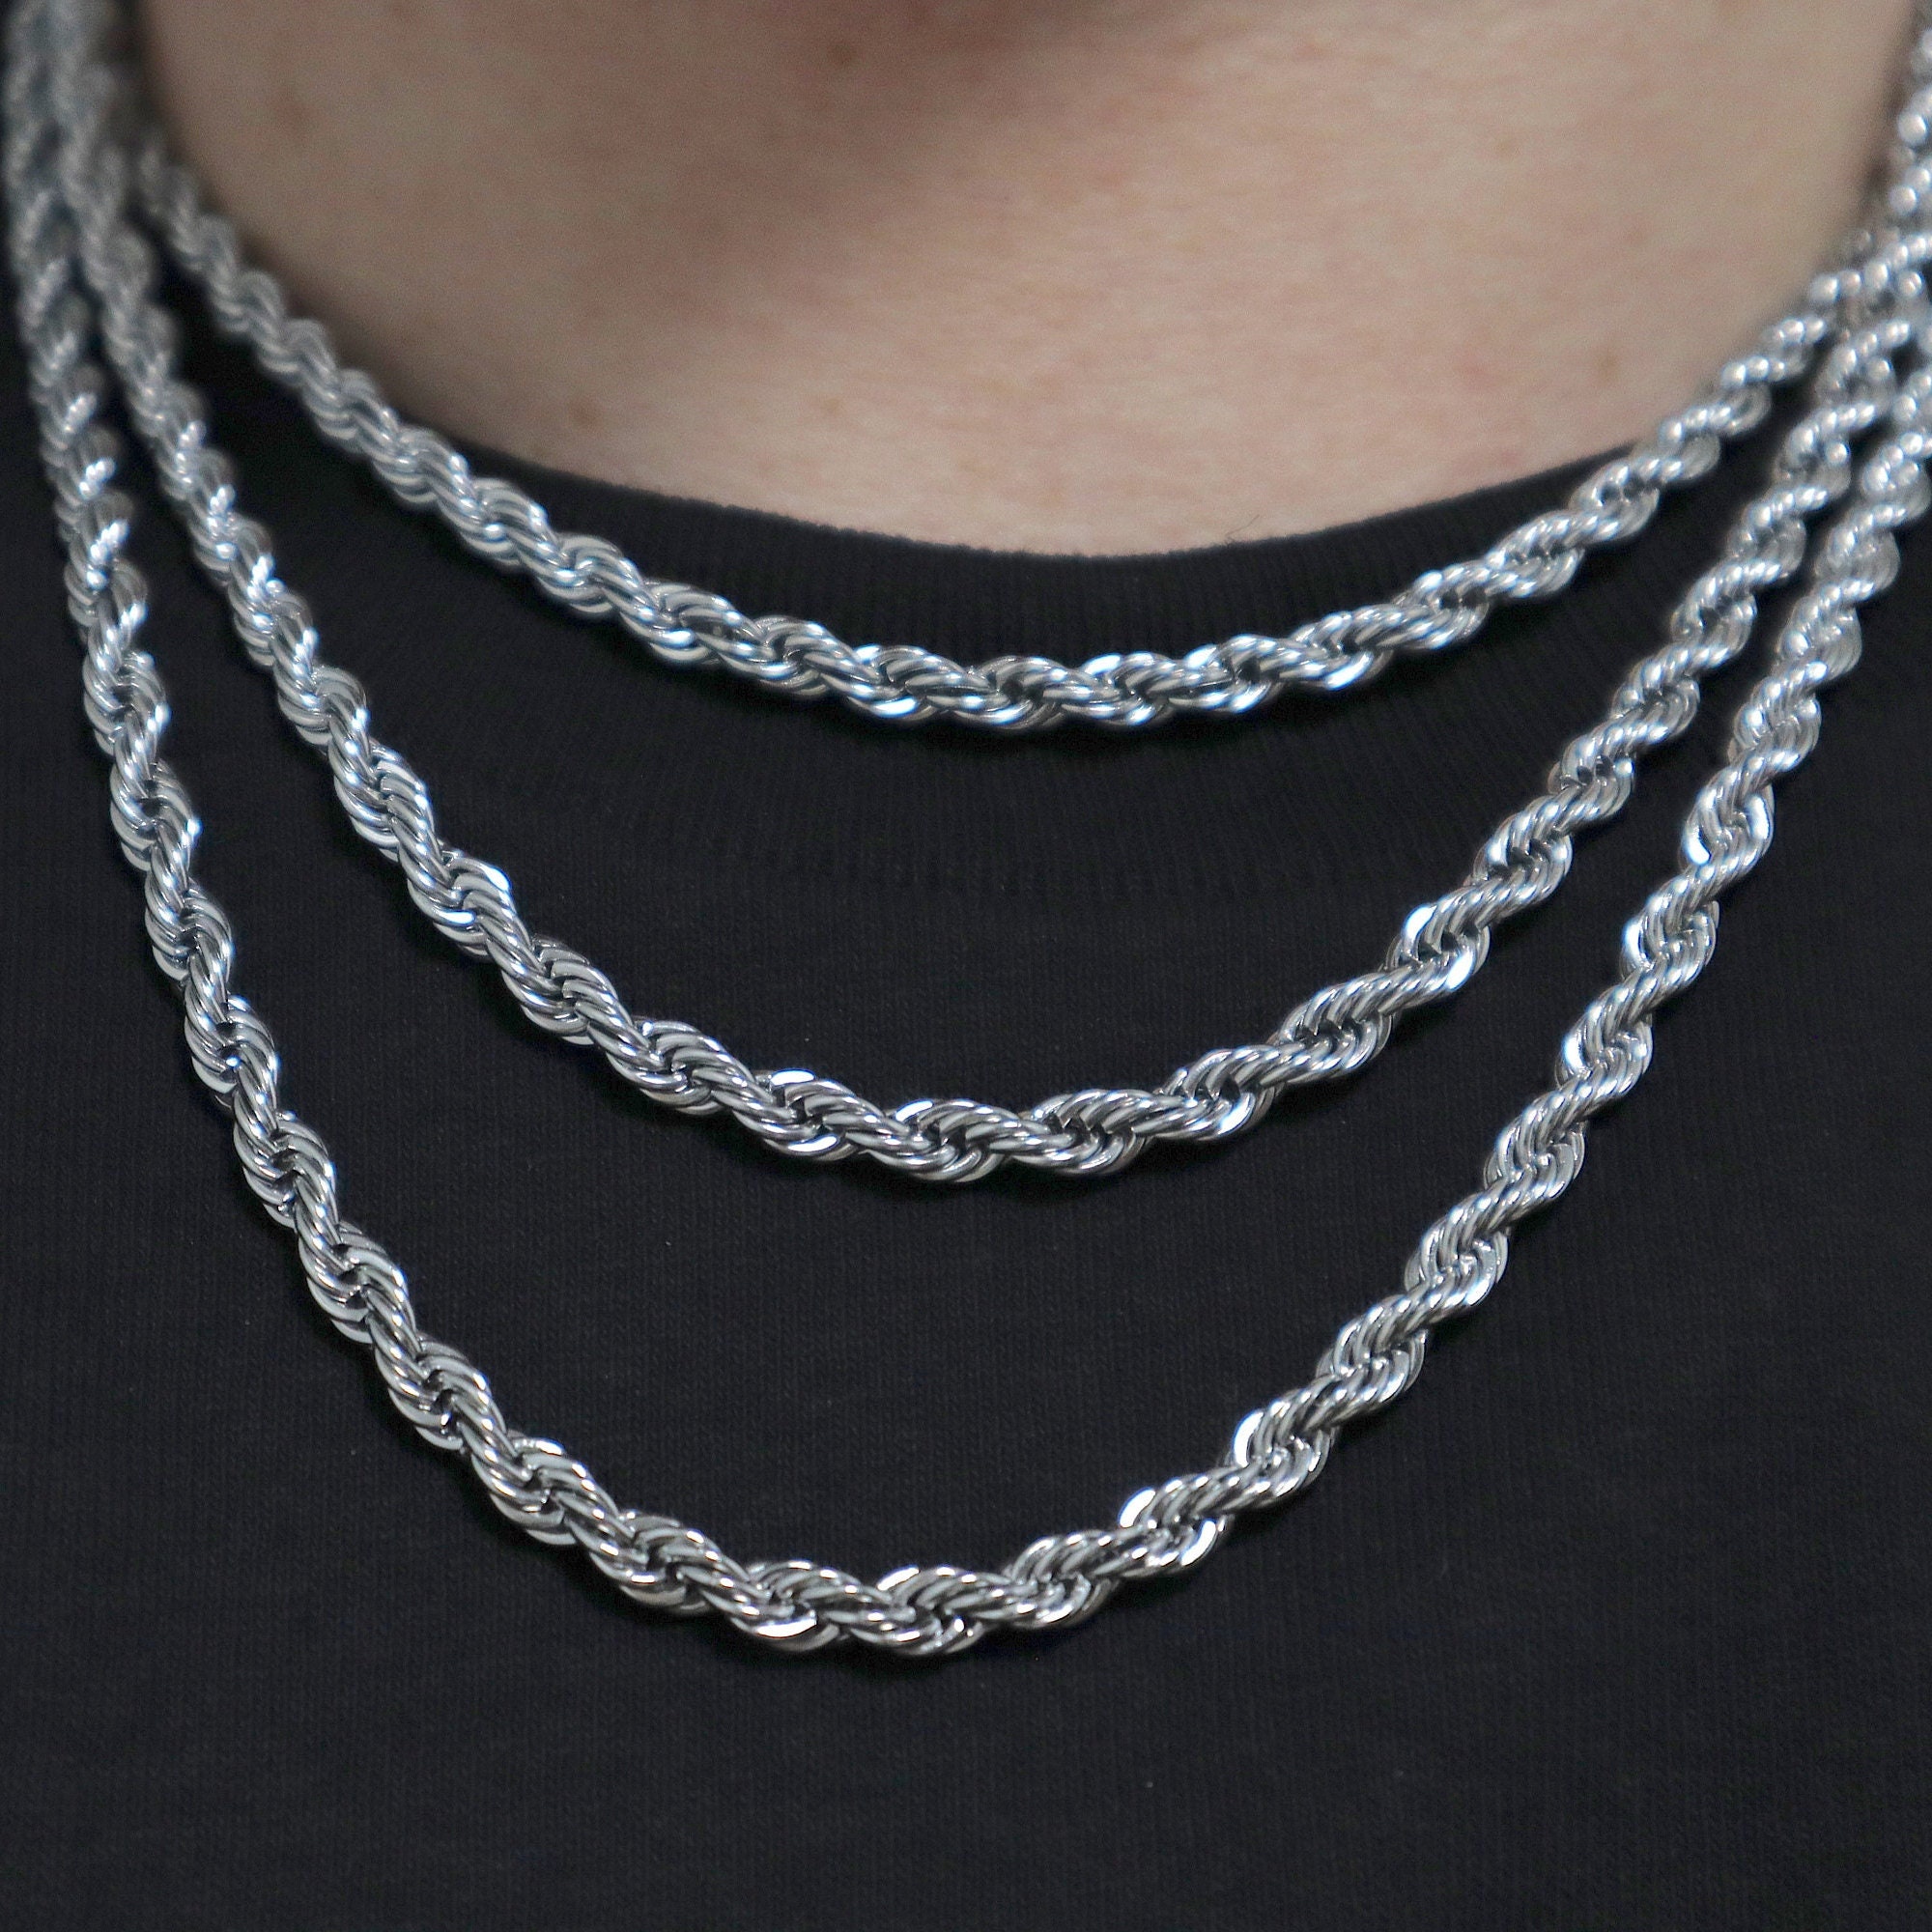 5mm Rope Chain Necklace Silver Stainless Steel 18 20 22 Inch -  Israel